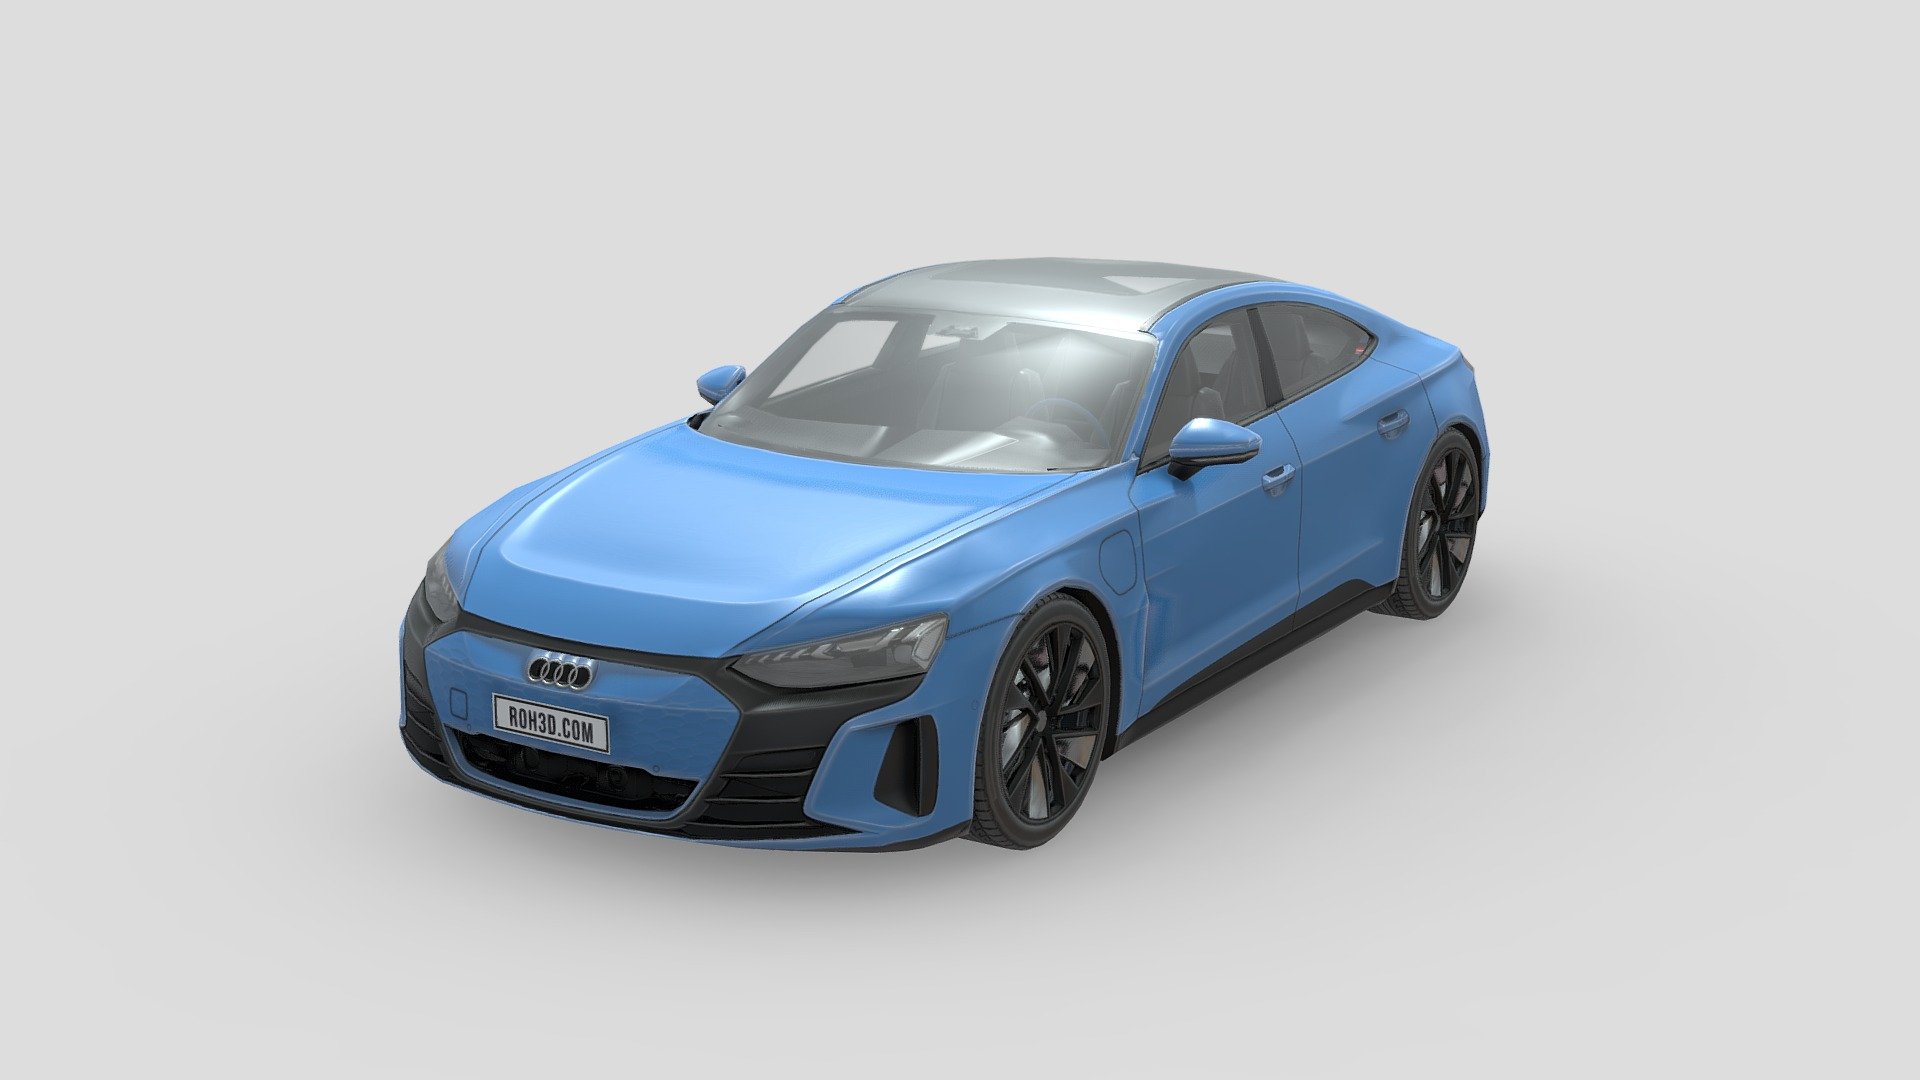 Low poly Audi e-tron GT quattro 2022

🌟 Rev up your 3D art game with our super-fun, crazy-detailed looking 3D car model!

🚀 Combining the magic of high-quality PBR textures with the power of low poly design, this masterpiece is perfect for jaw-dropping close-ups and seamlessly fits into any project.

❤️ You’ll fall in love with its mind-blowing detail and lightning-fast performance, thanks to pro-level topology and perfect surface flow poly action. Plus, it just works with all major 3D software and render engines 3d model